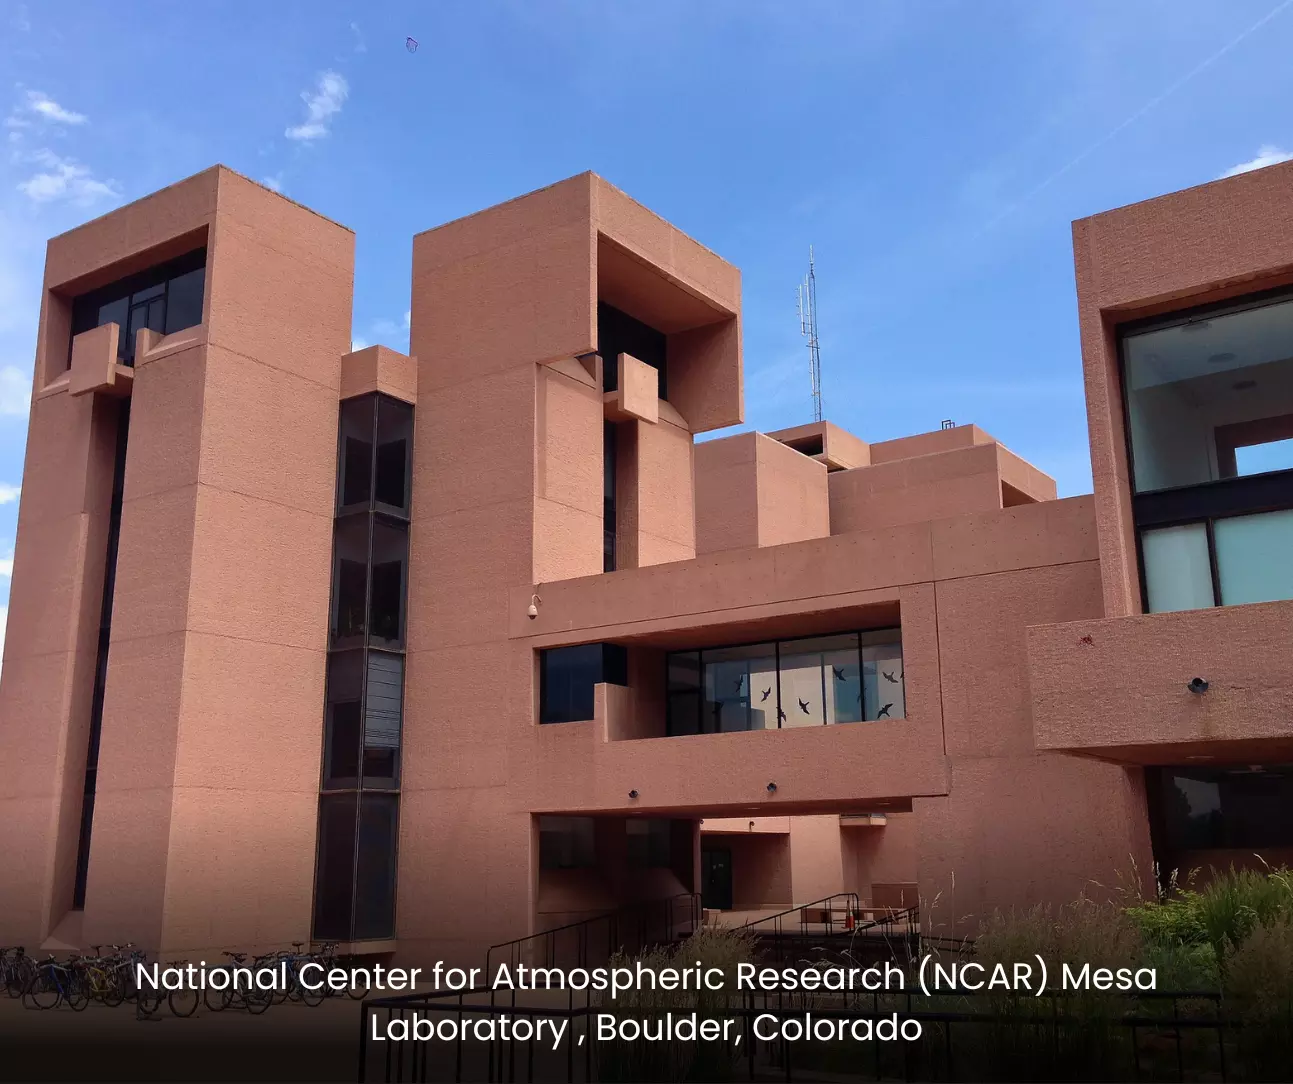 National Center for Atmospheric Research NCAR Mesa Laboratory